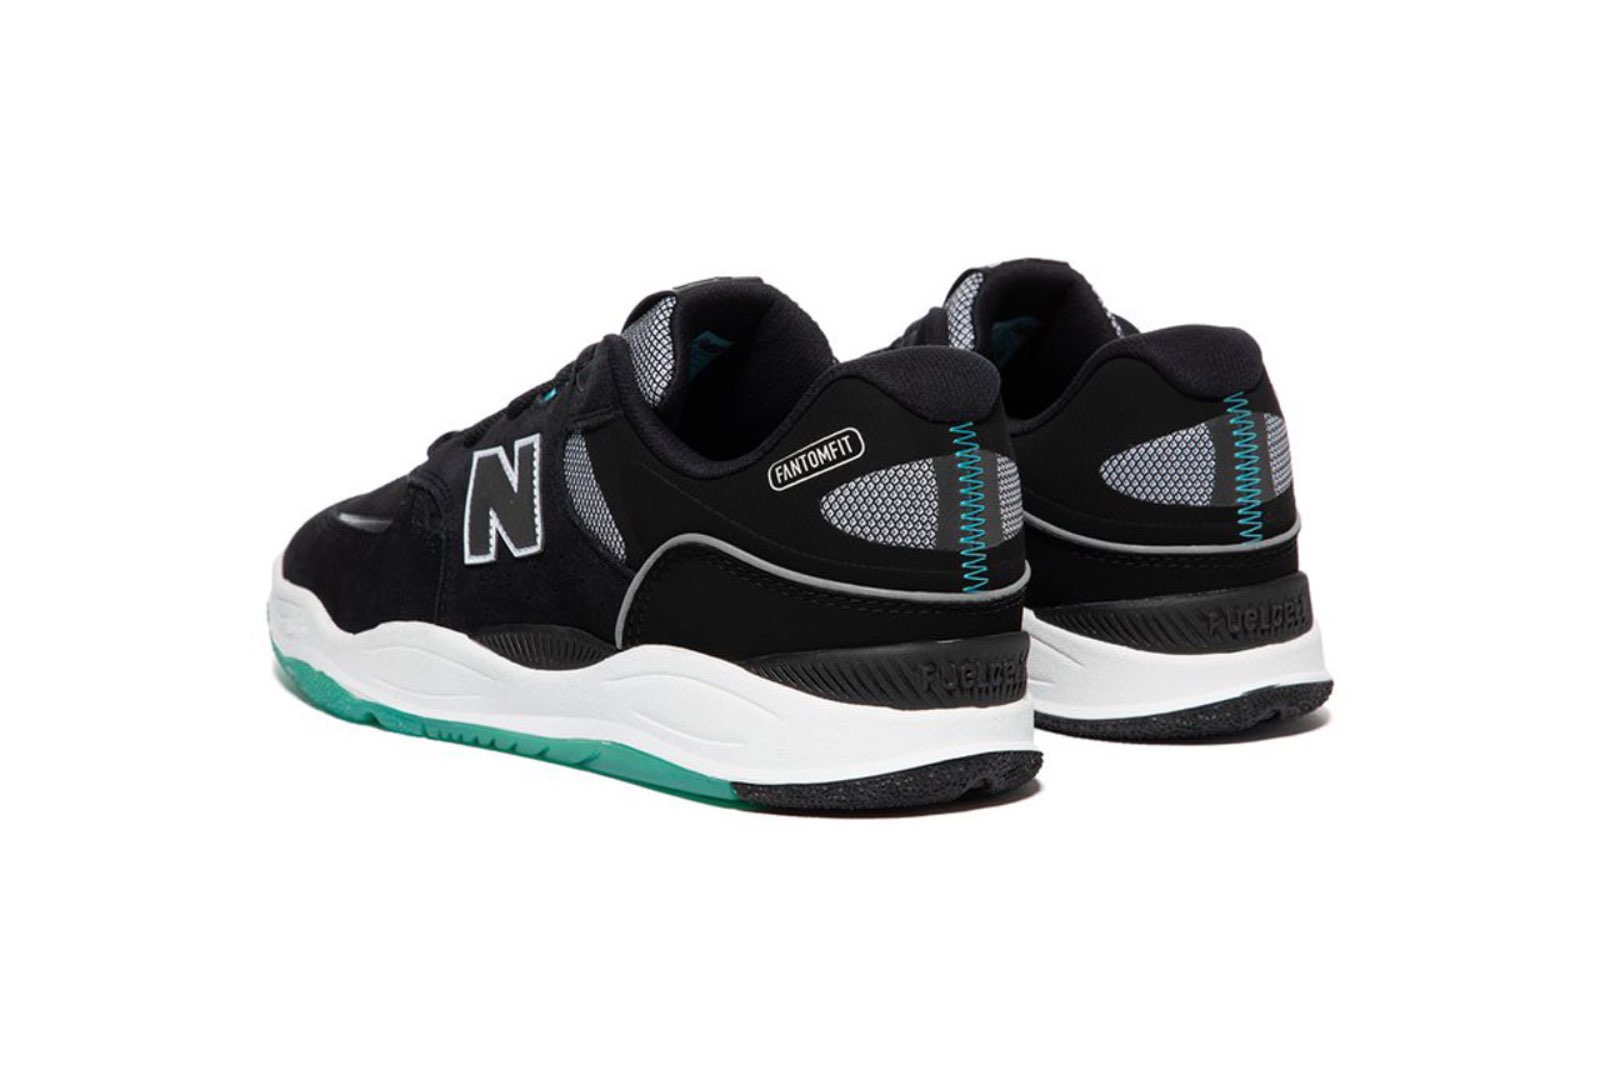 New Balance, Numeric 1010 Silhouette, new color